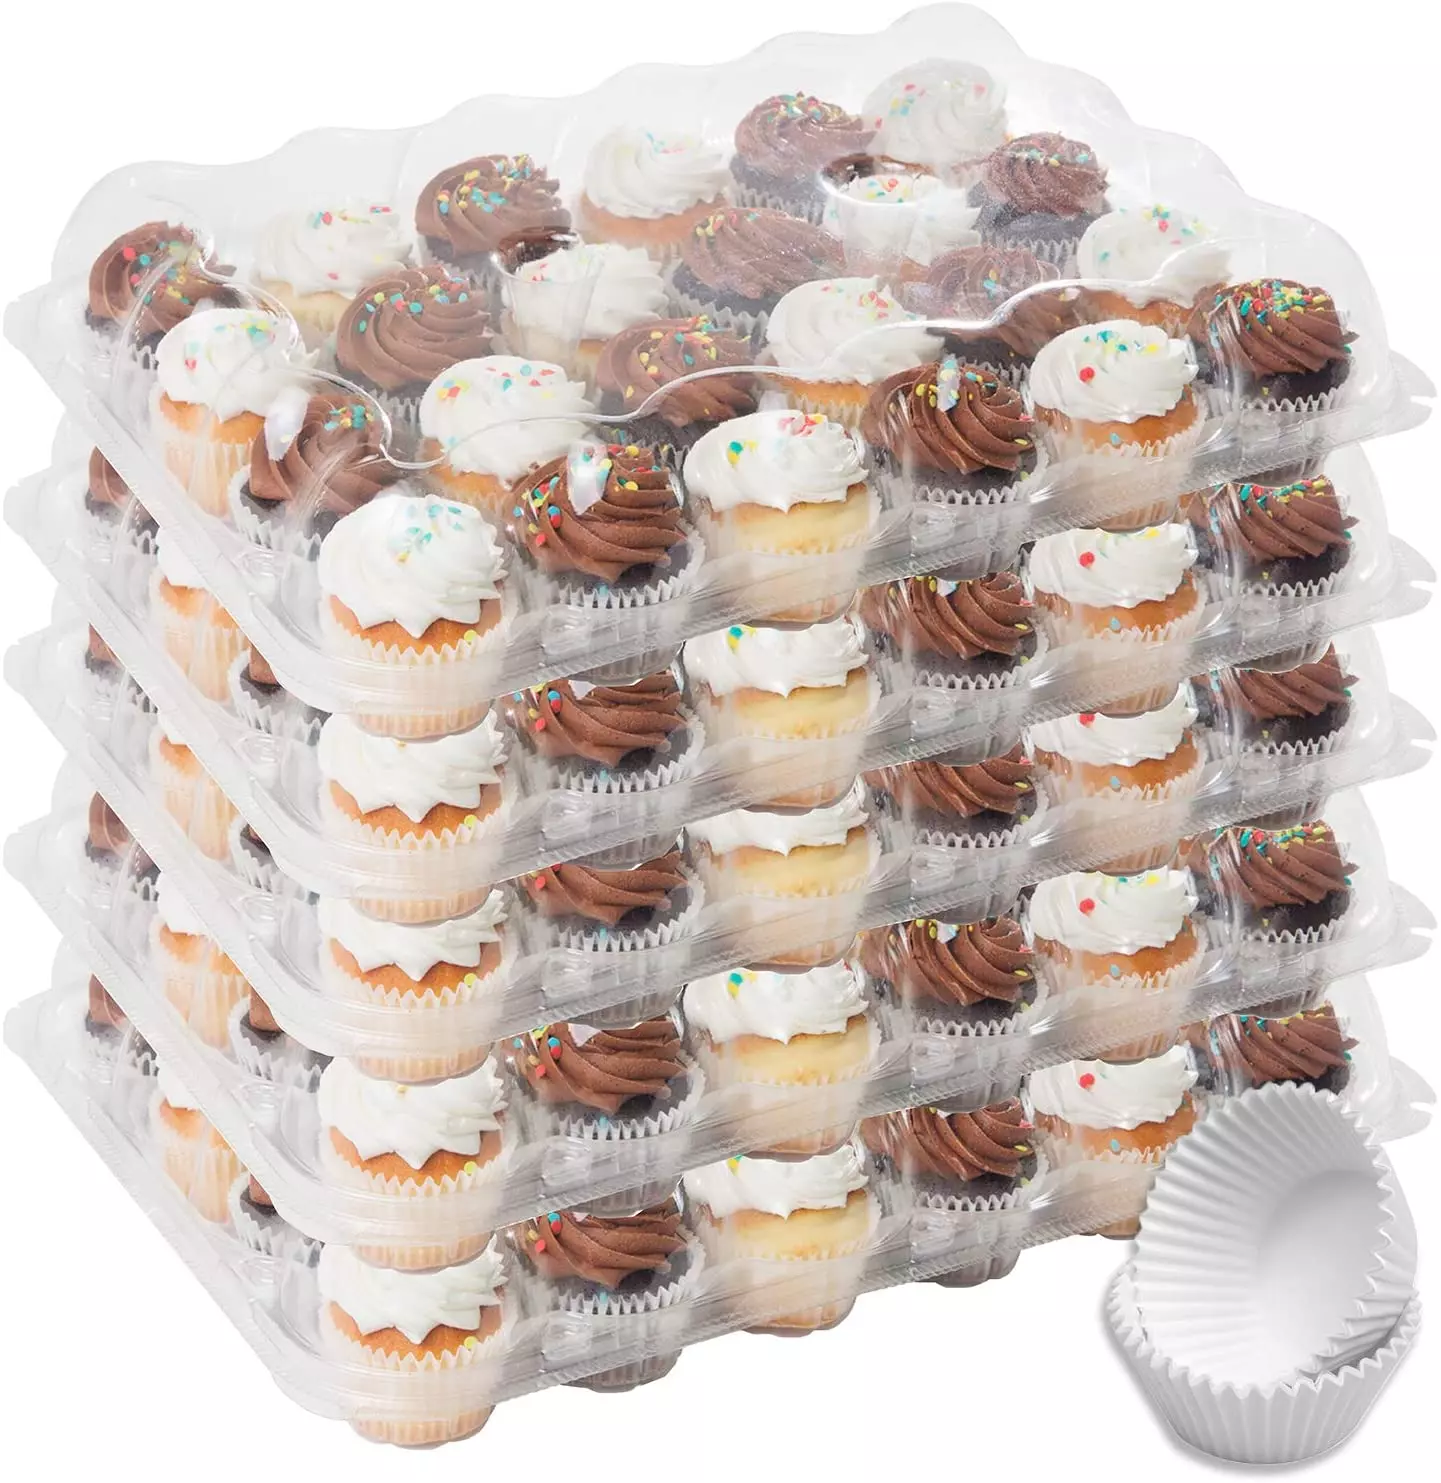 Cupcake Storage Carrier Container Holds 24 Cupcakes or Muffins Great for Parties, Clear